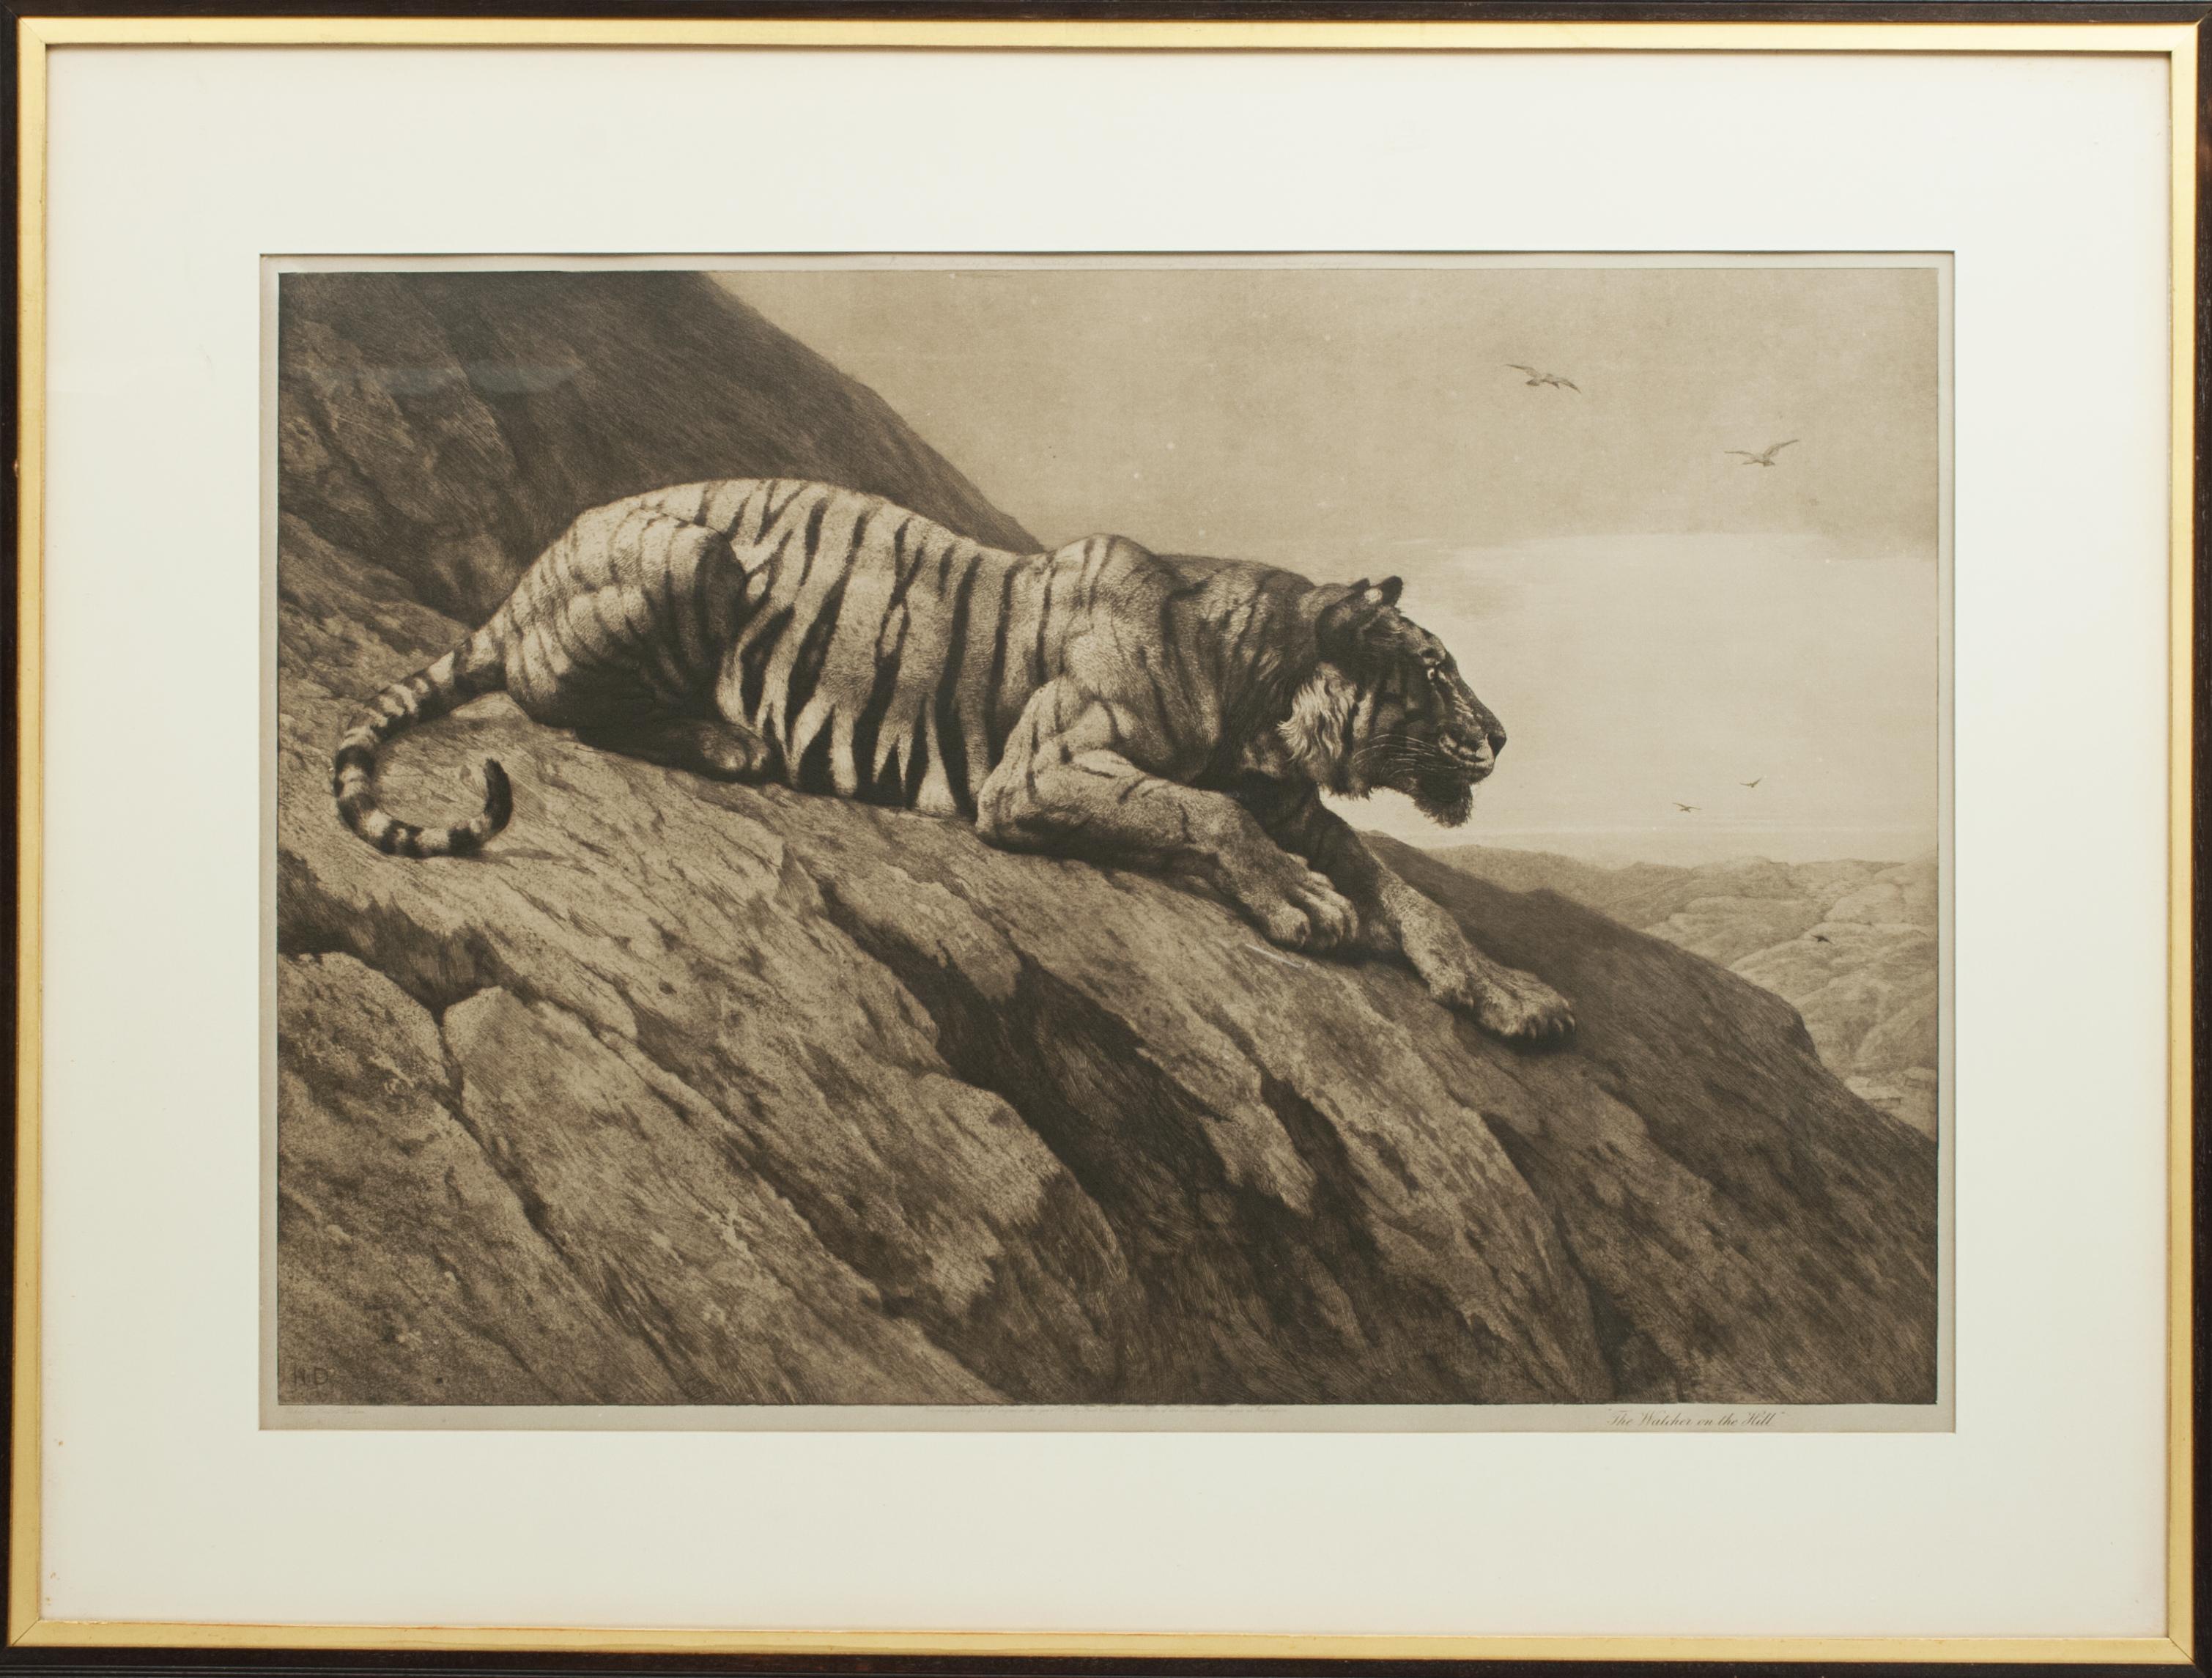 A wonderful wildlife etching of a tiger by Herbert Dicksee. The framed picture shows a tiger crouching on some rocks overlooking the open grassland below. The powerful etching is after the original by Herbert Thomas Dicksee, published 1904 by Frost